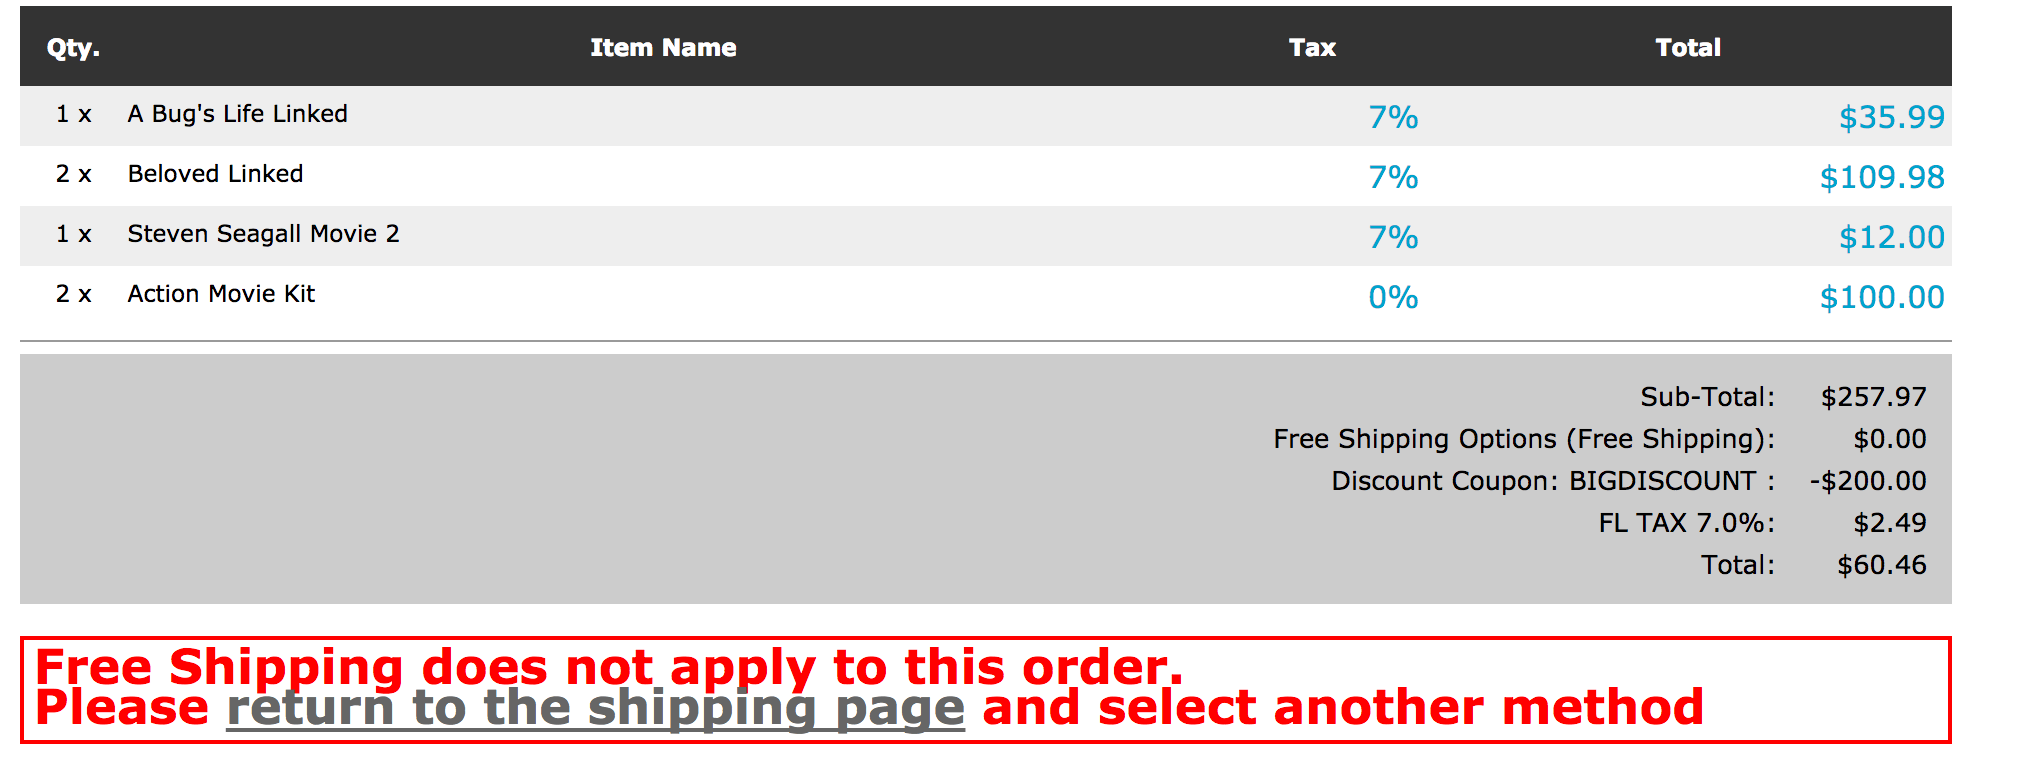 Zen Cart Free Shipping Recalculation on Checkout Confirmation Page